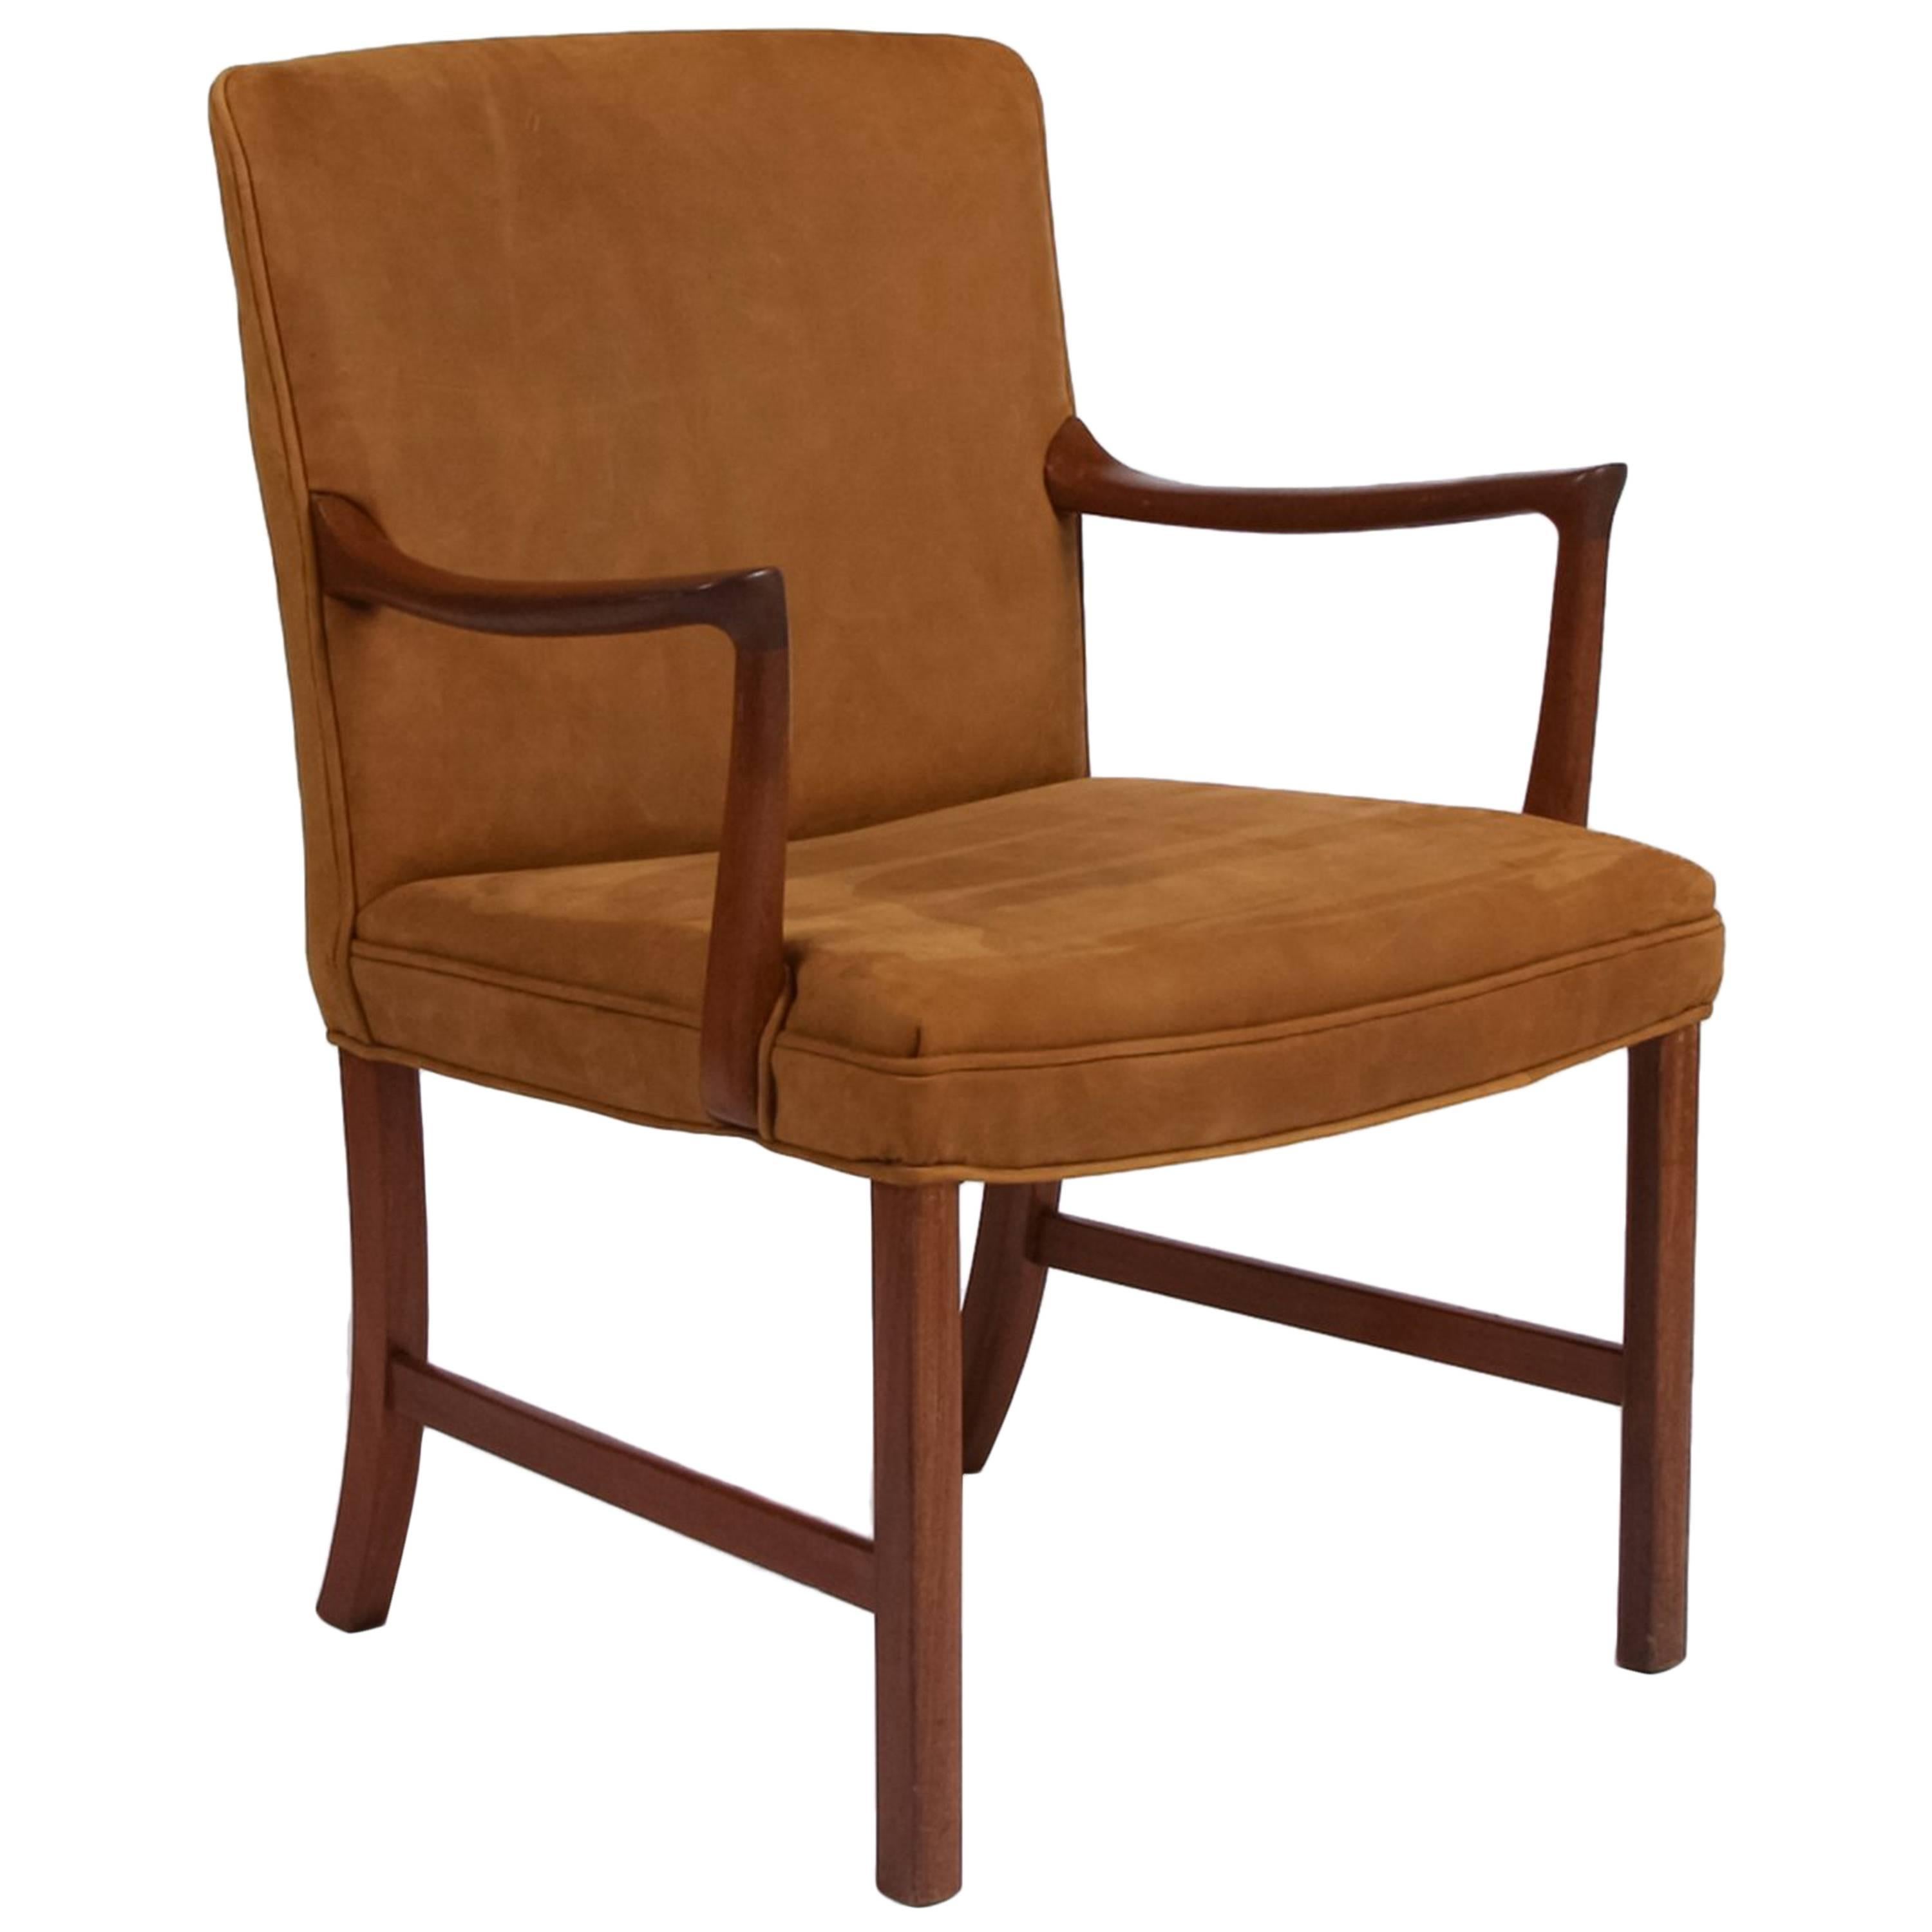 1960s Leather Ole Wanscher Chair For Sale